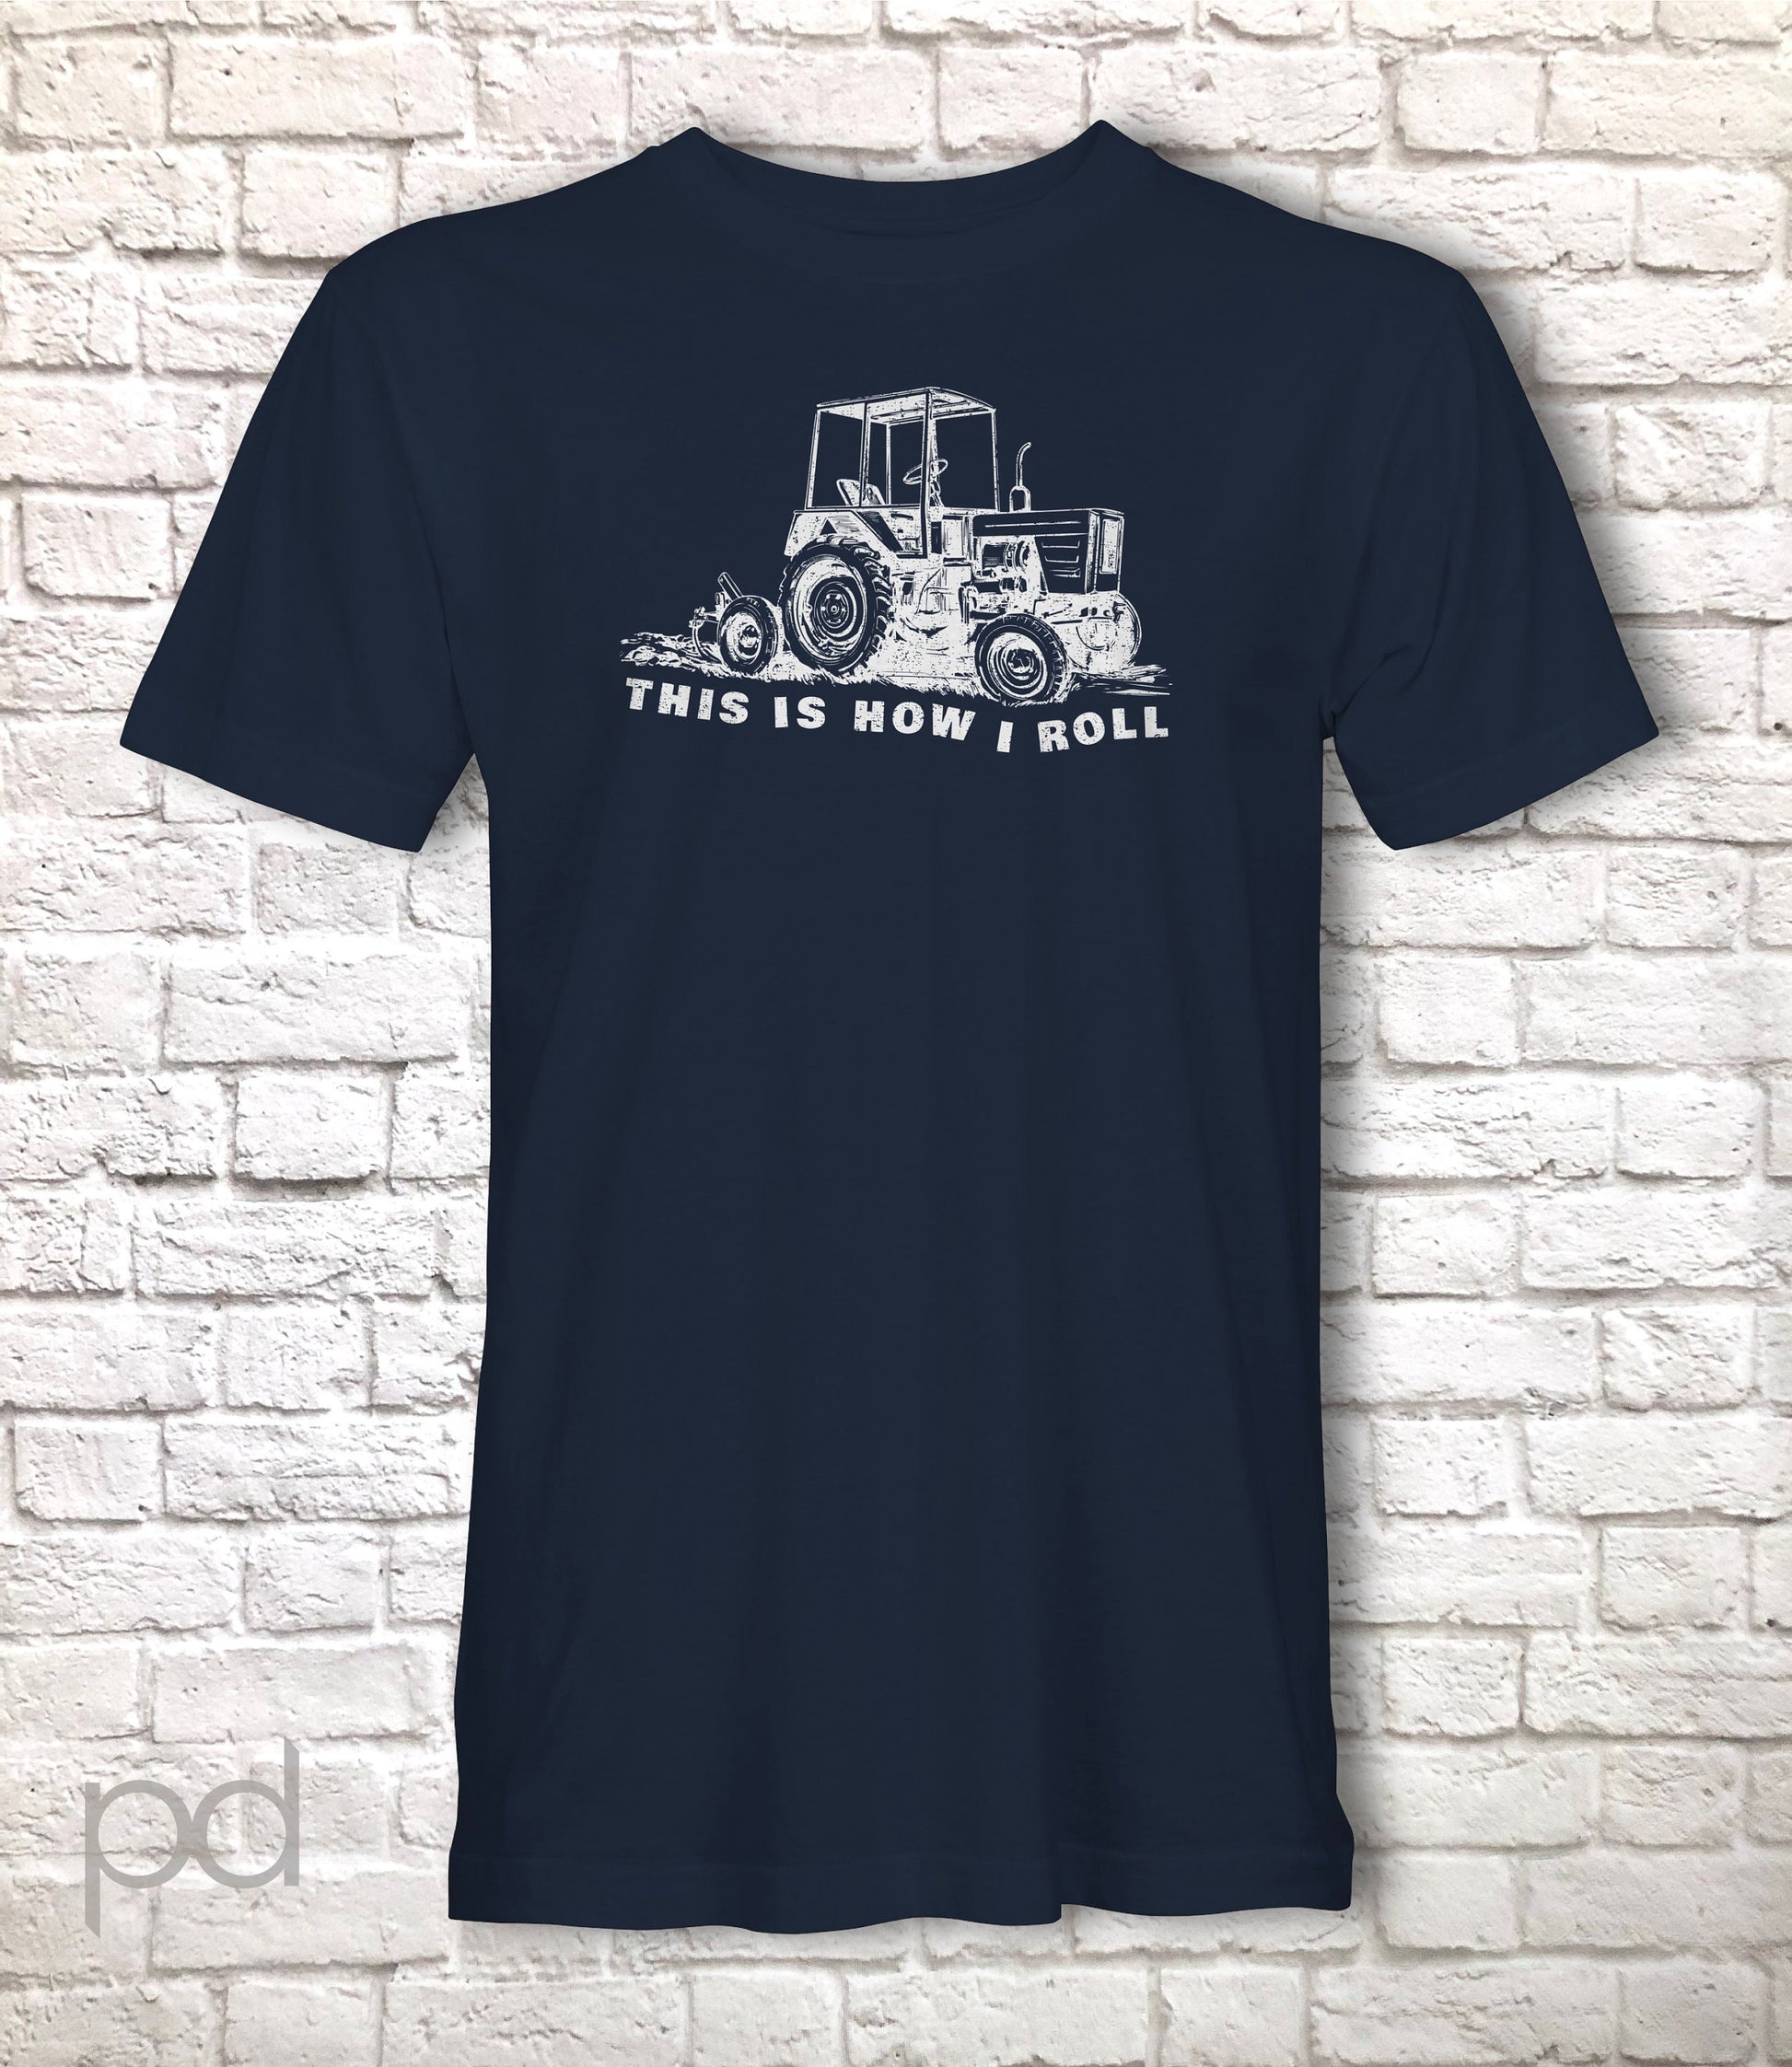 Funny Farmer T-Shirt, This Is How I Roll Tractor Design Gift Idea, Humorous Tractor Farming Tee Shirt T Top